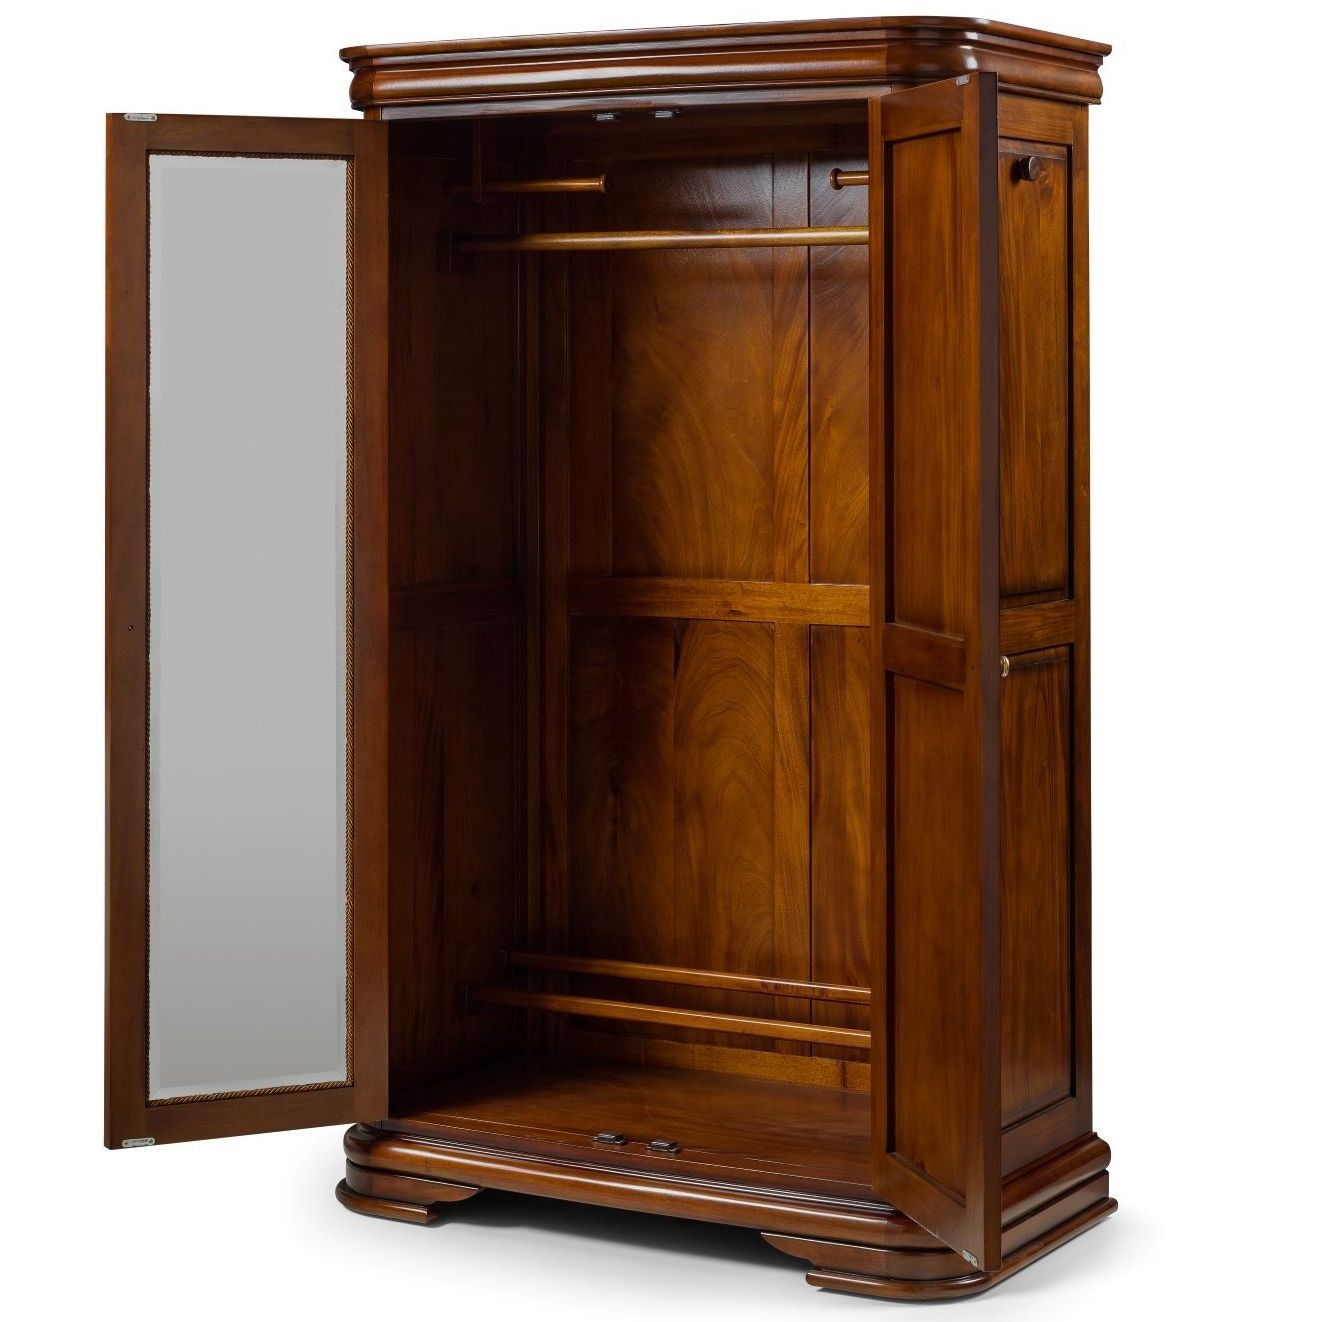 Antoinette French Sleigh Double Wardrobe | Traditional French Wardrobes |  French Bedroom Furniture | Sleigh Wardrobe Throughout Mahogany Wardrobes (Gallery 11 of 20)